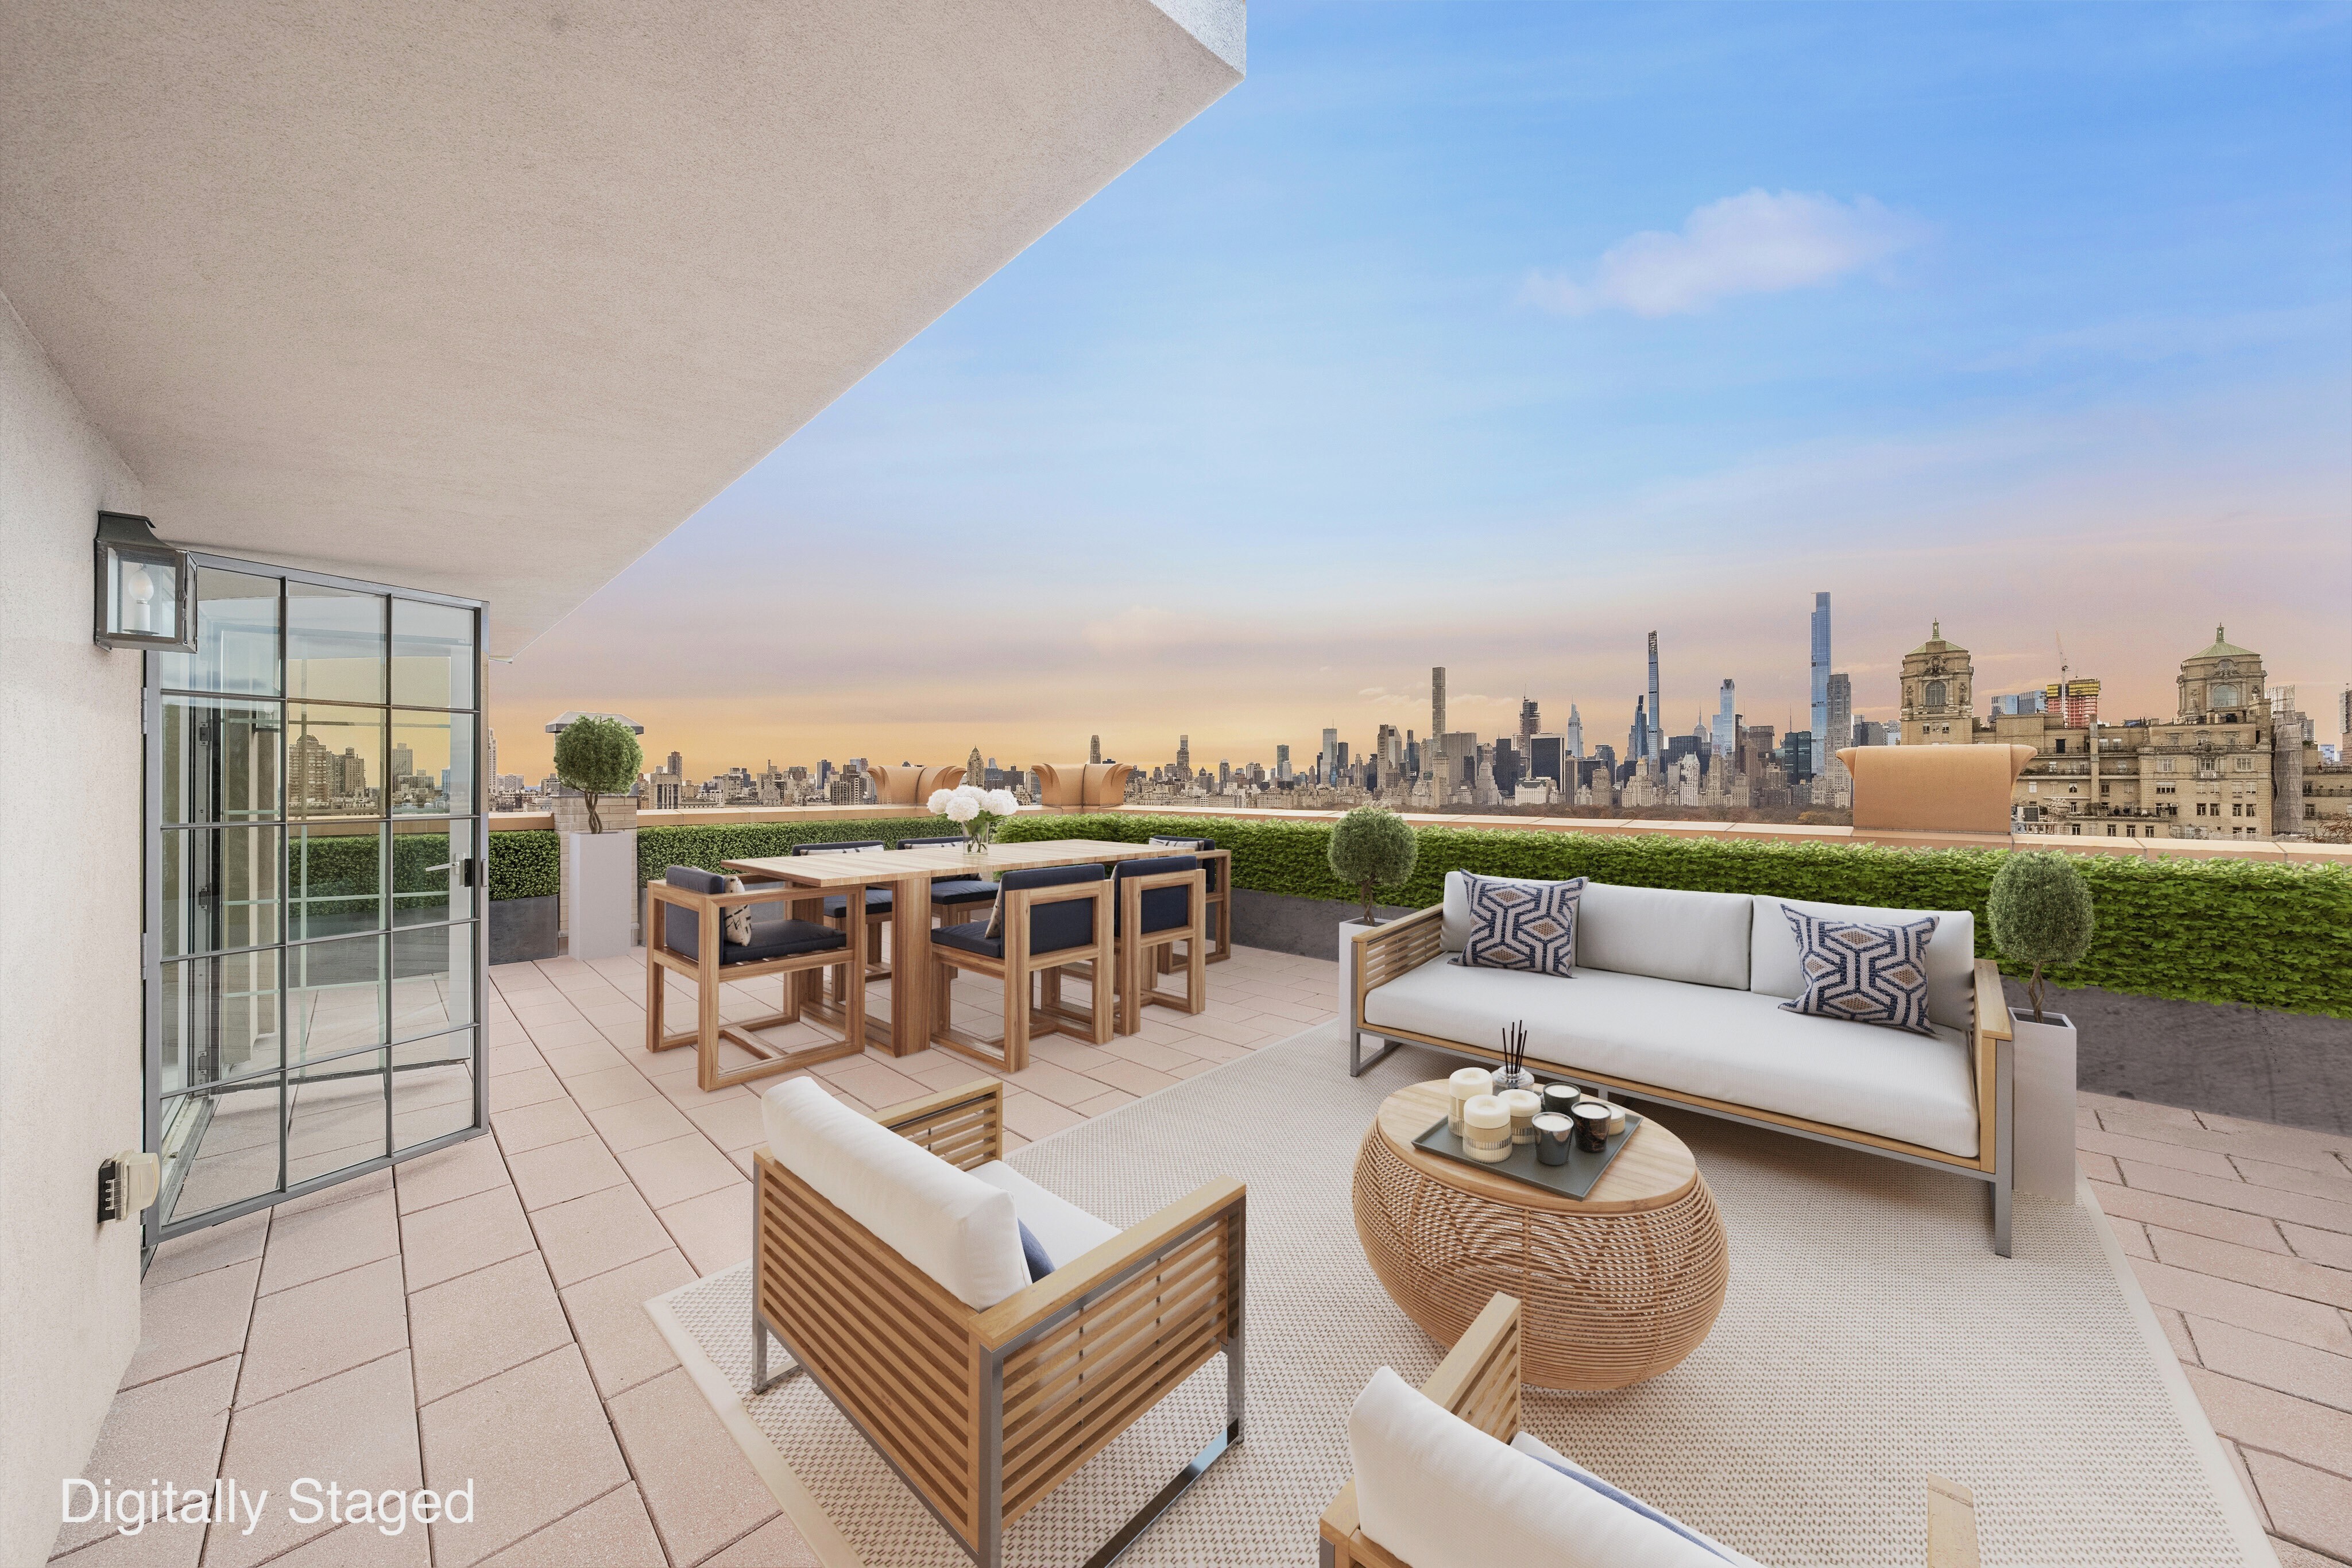 241 Central Park Phc, Upper West Side, Upper West Side, NYC - 3 Bedrooms  
3.5 Bathrooms  
8 Rooms - 